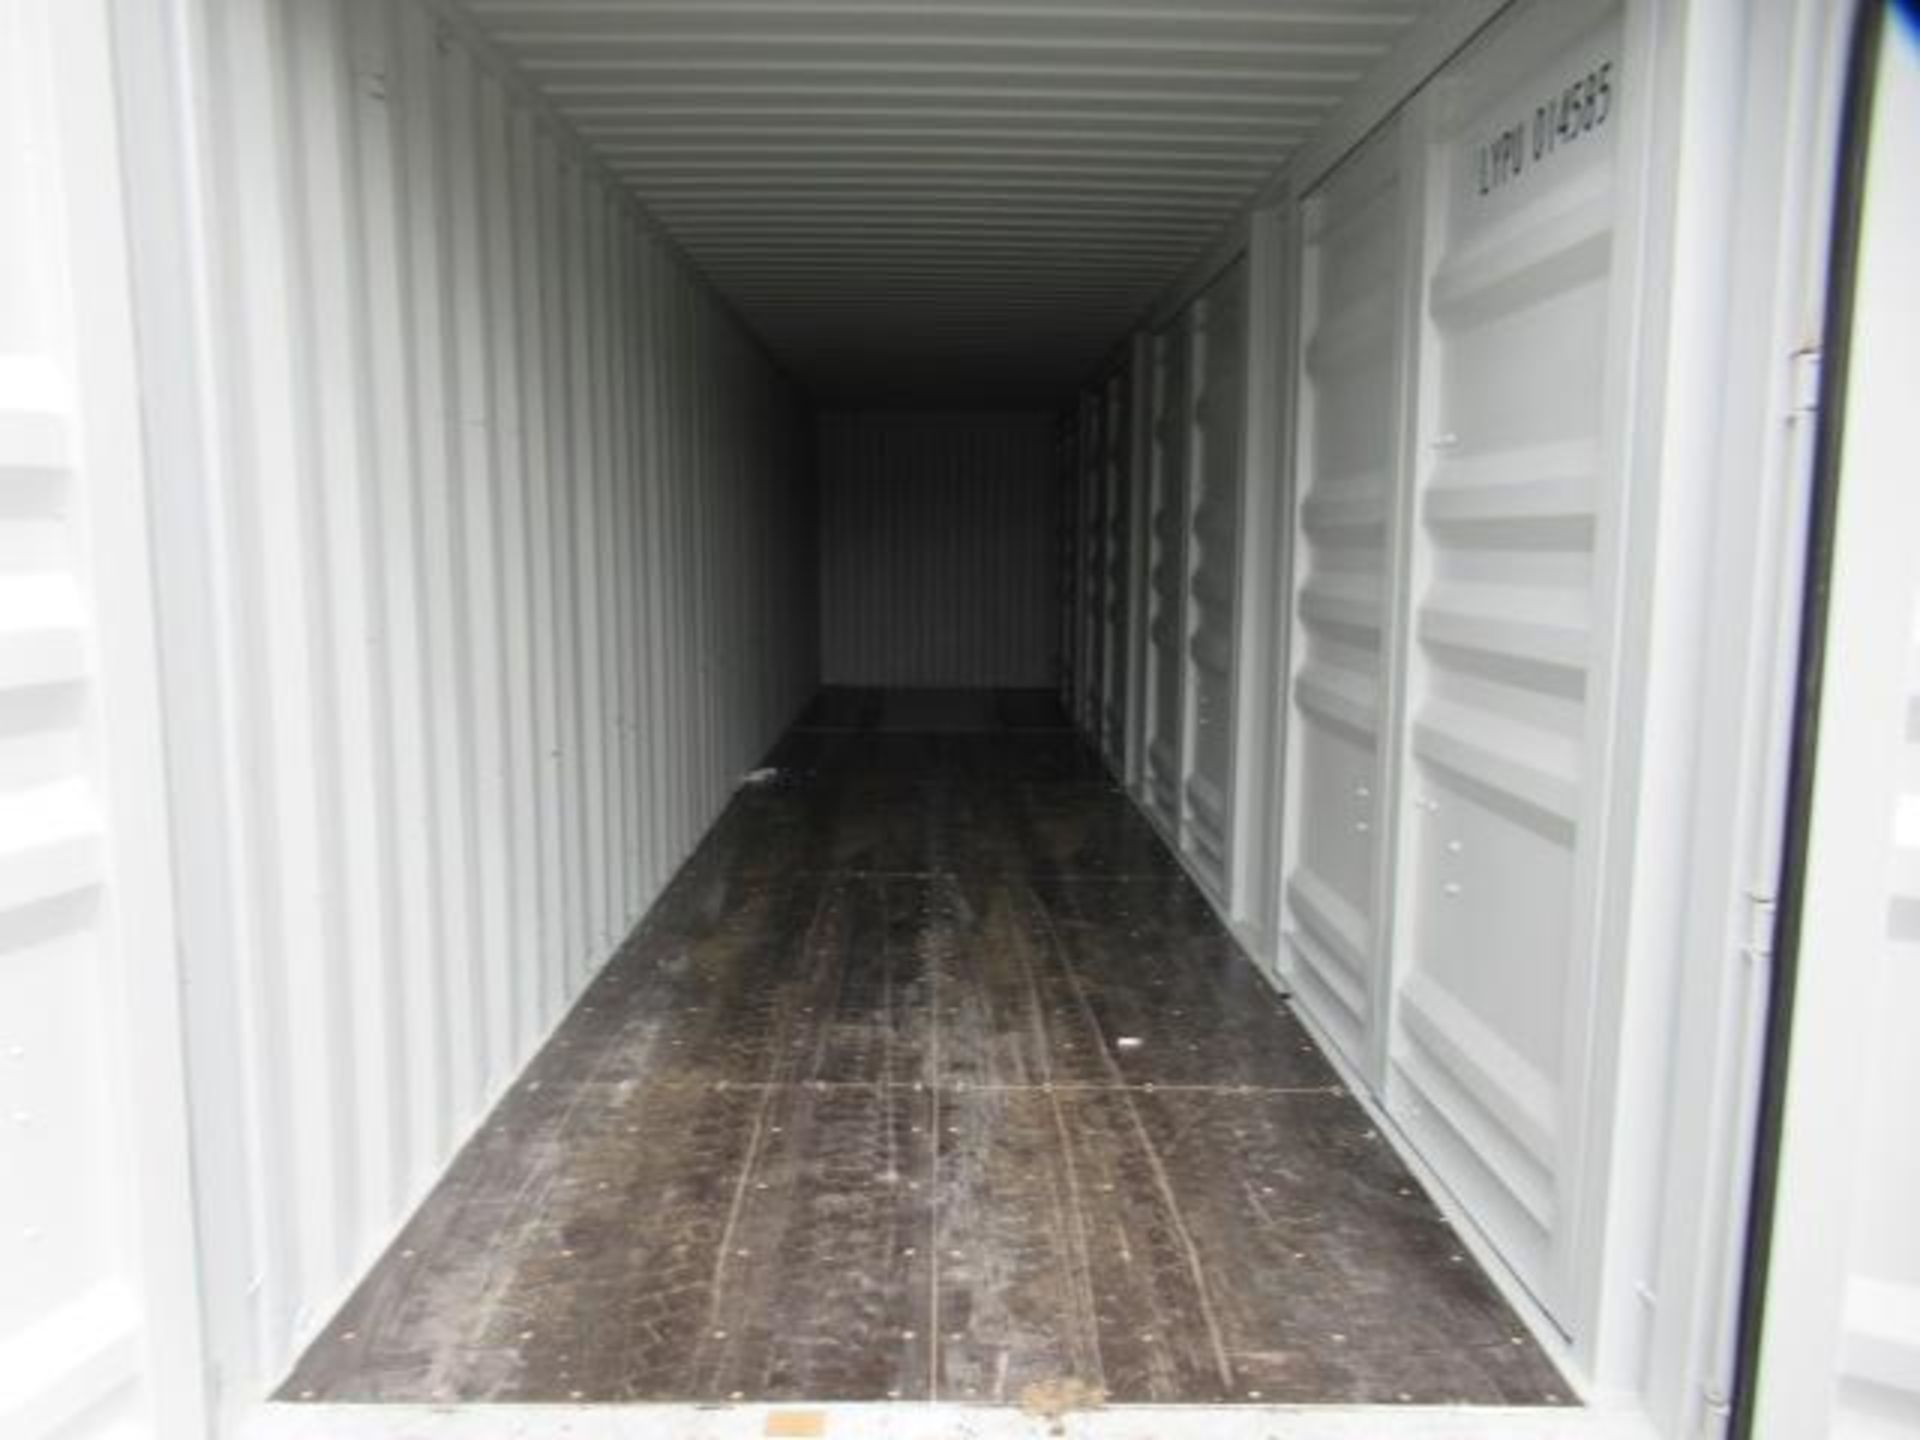 2024 40' HIGH CUBE SHIPPING CONTAINER W/ (4) SIDE DOORS, SER#: LYPU0145852 (UNUSED) - Image 5 of 6